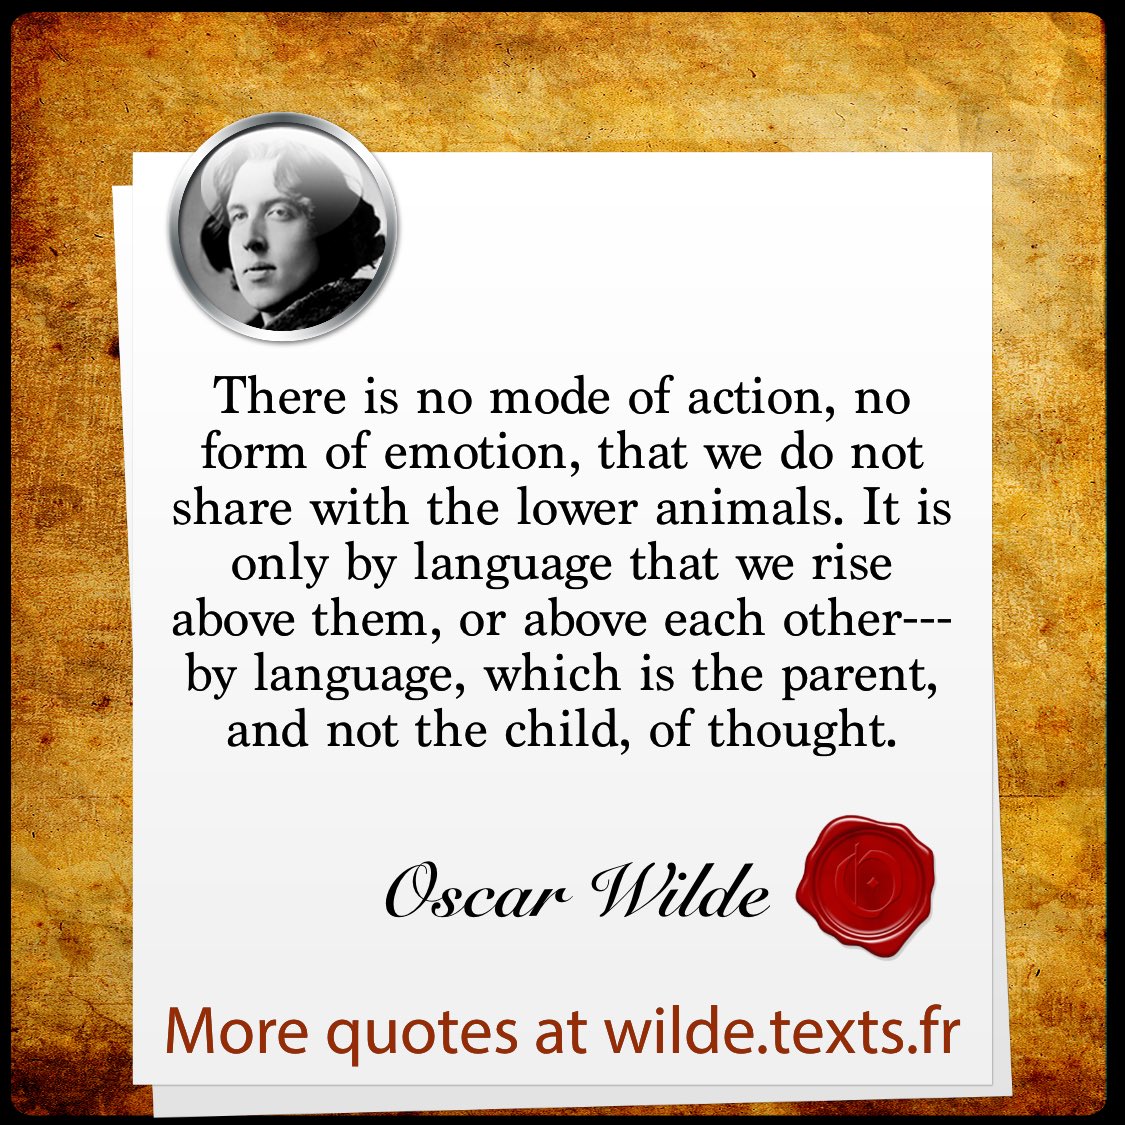 “There is no mode of action, no form of emotion, that we do not share with the lower animals. It is only by language that we rise above them, or above each other---by language, which is the parent, and not the child, …” txf.ro/m/wf20 #OscarWilde